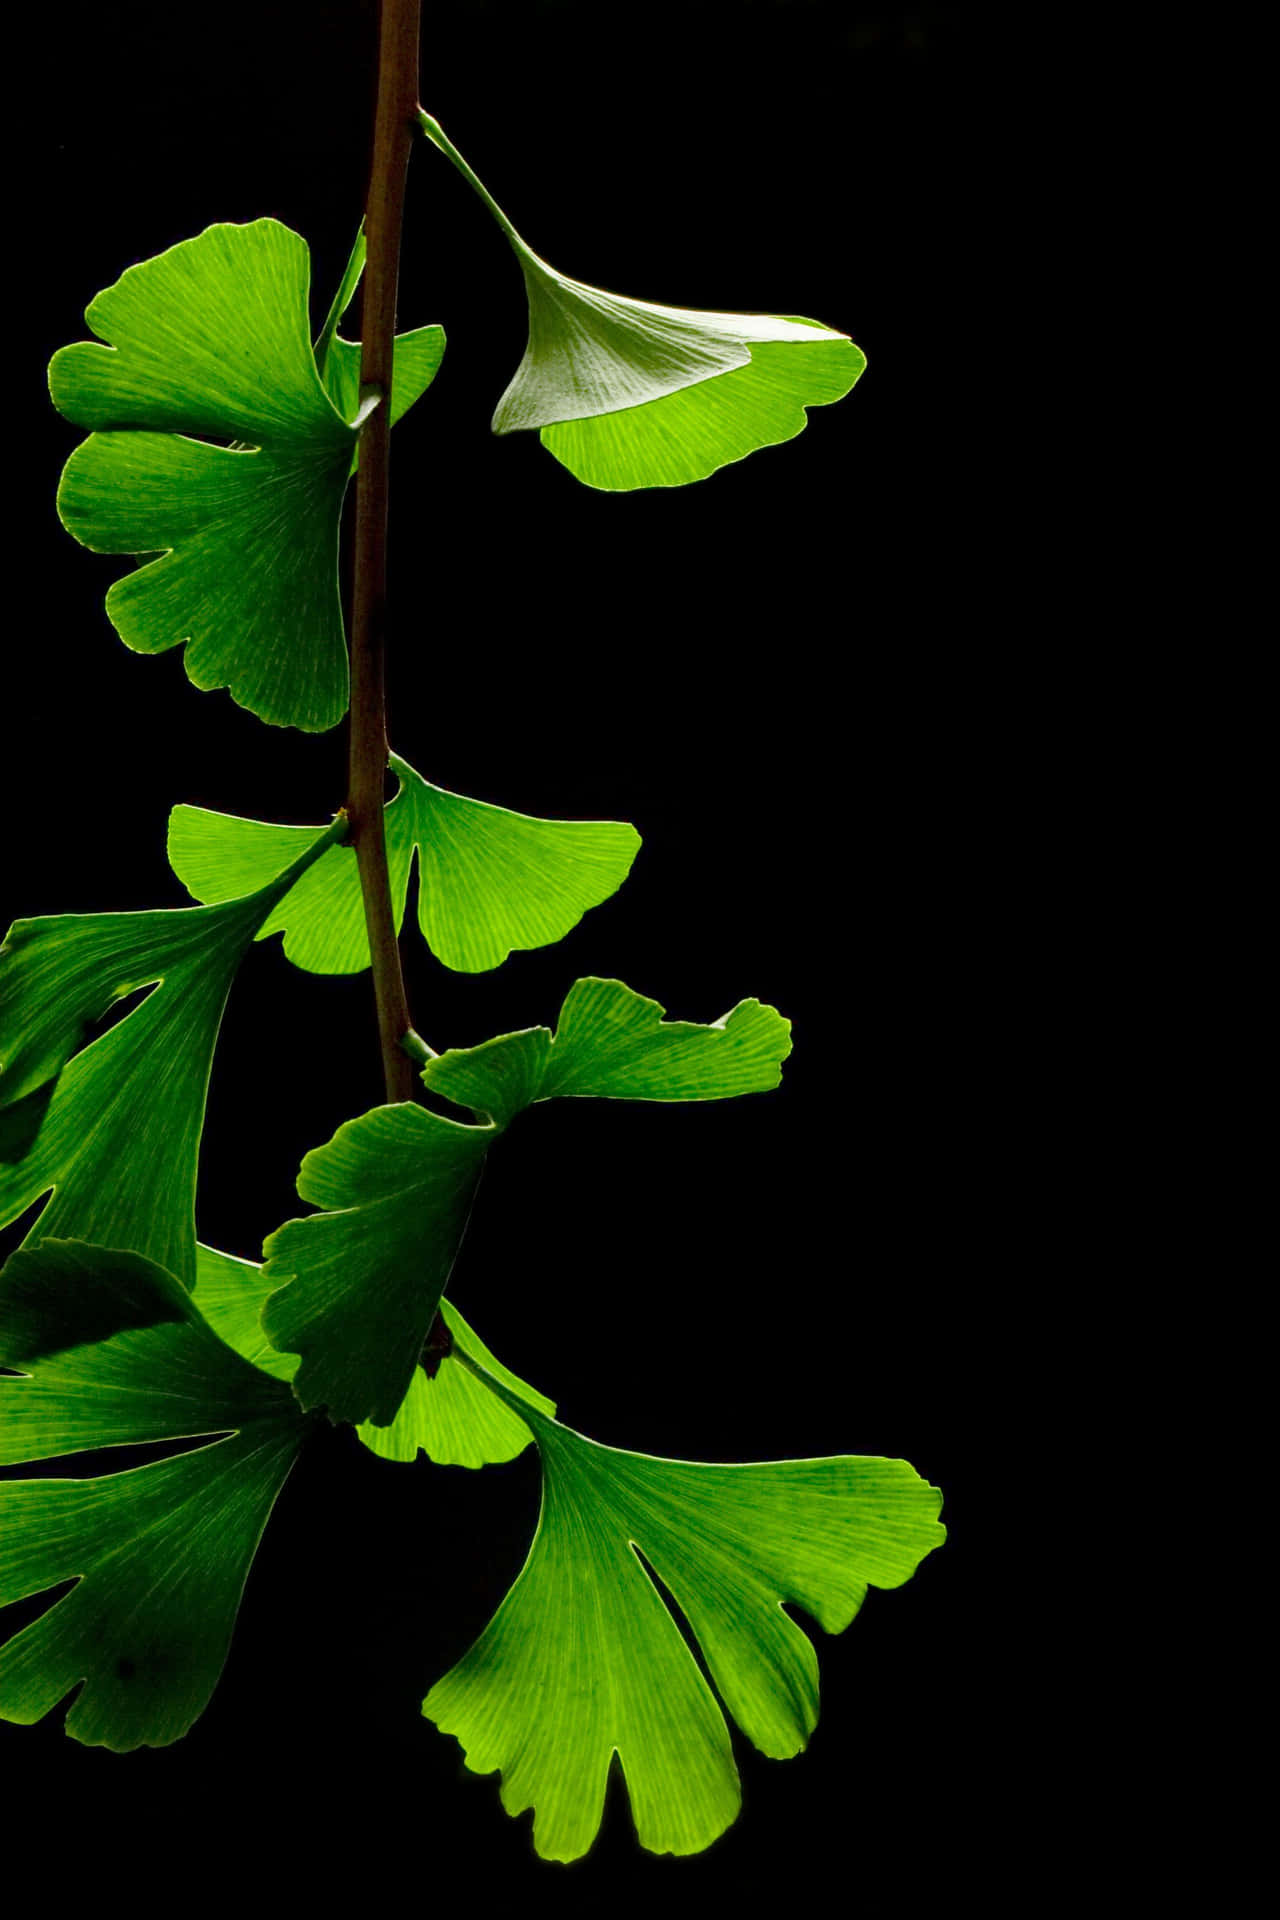 A Green Leaf Is Hanging On A Branch Wallpaper